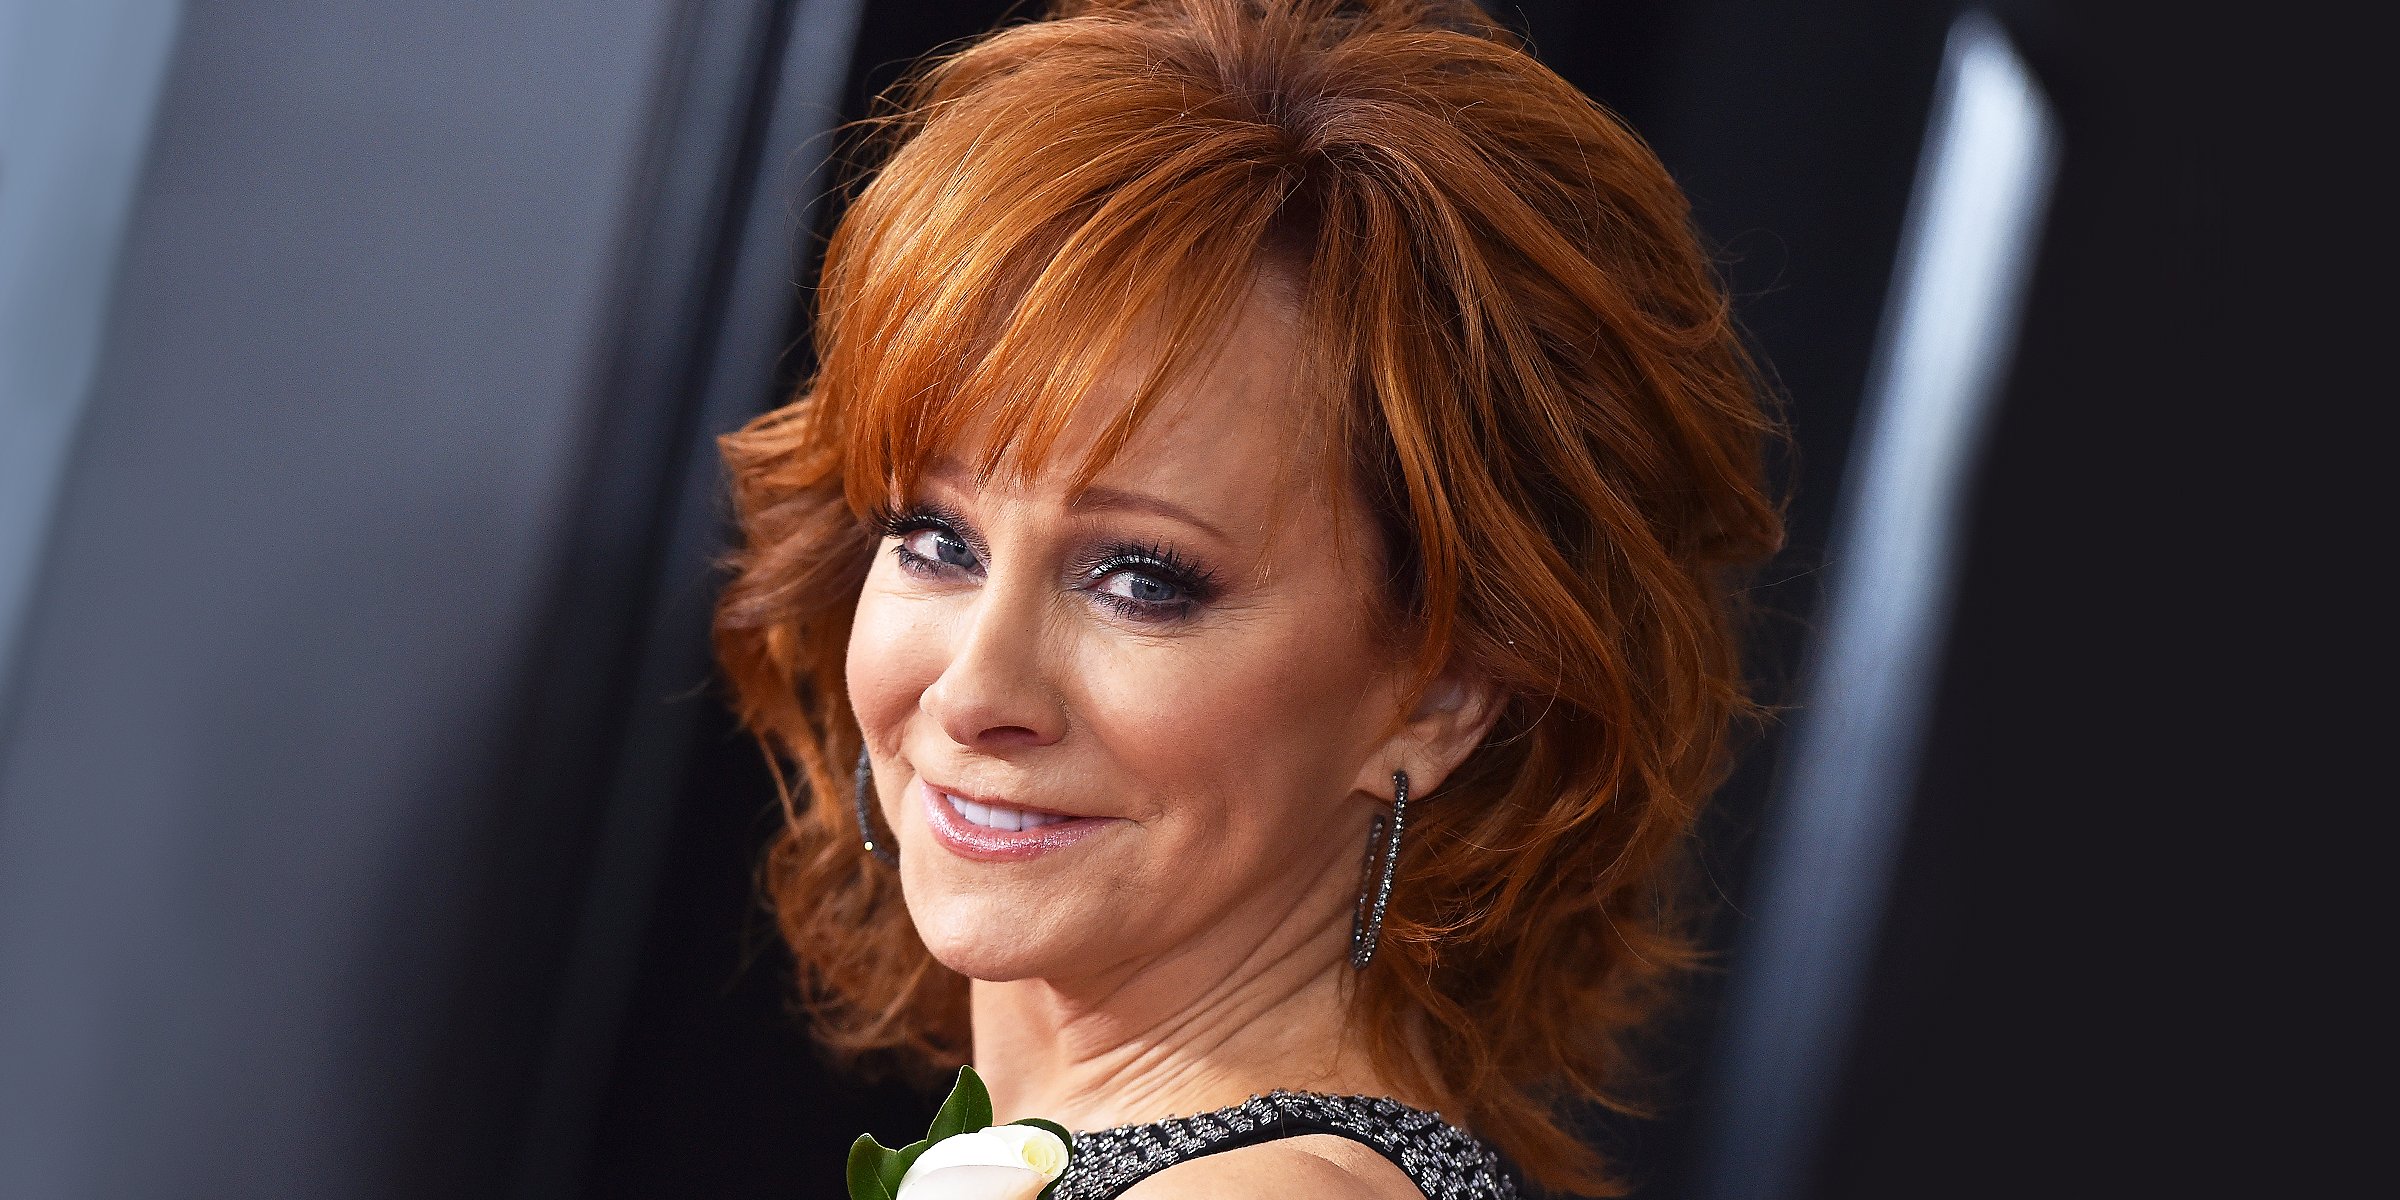 Reba McEntire, 2018 | Source: Getty Images